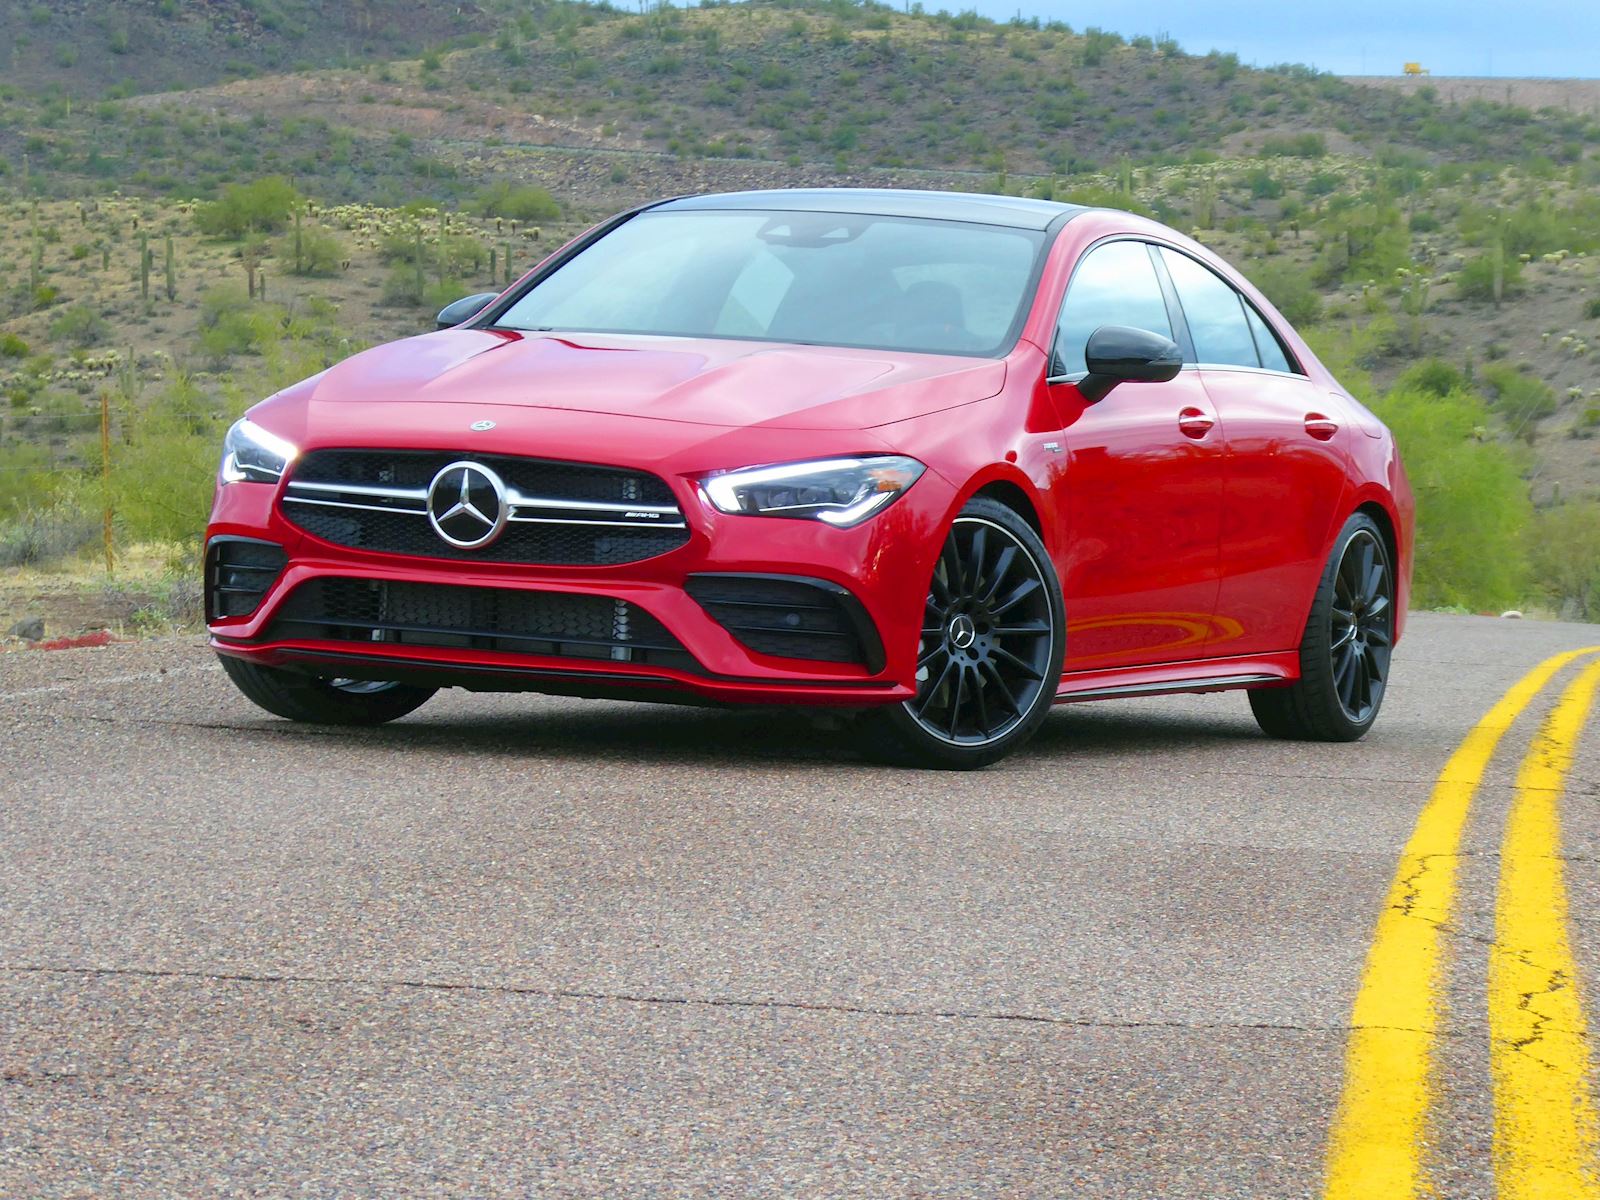 2020 Mercedes CLA 35 front view